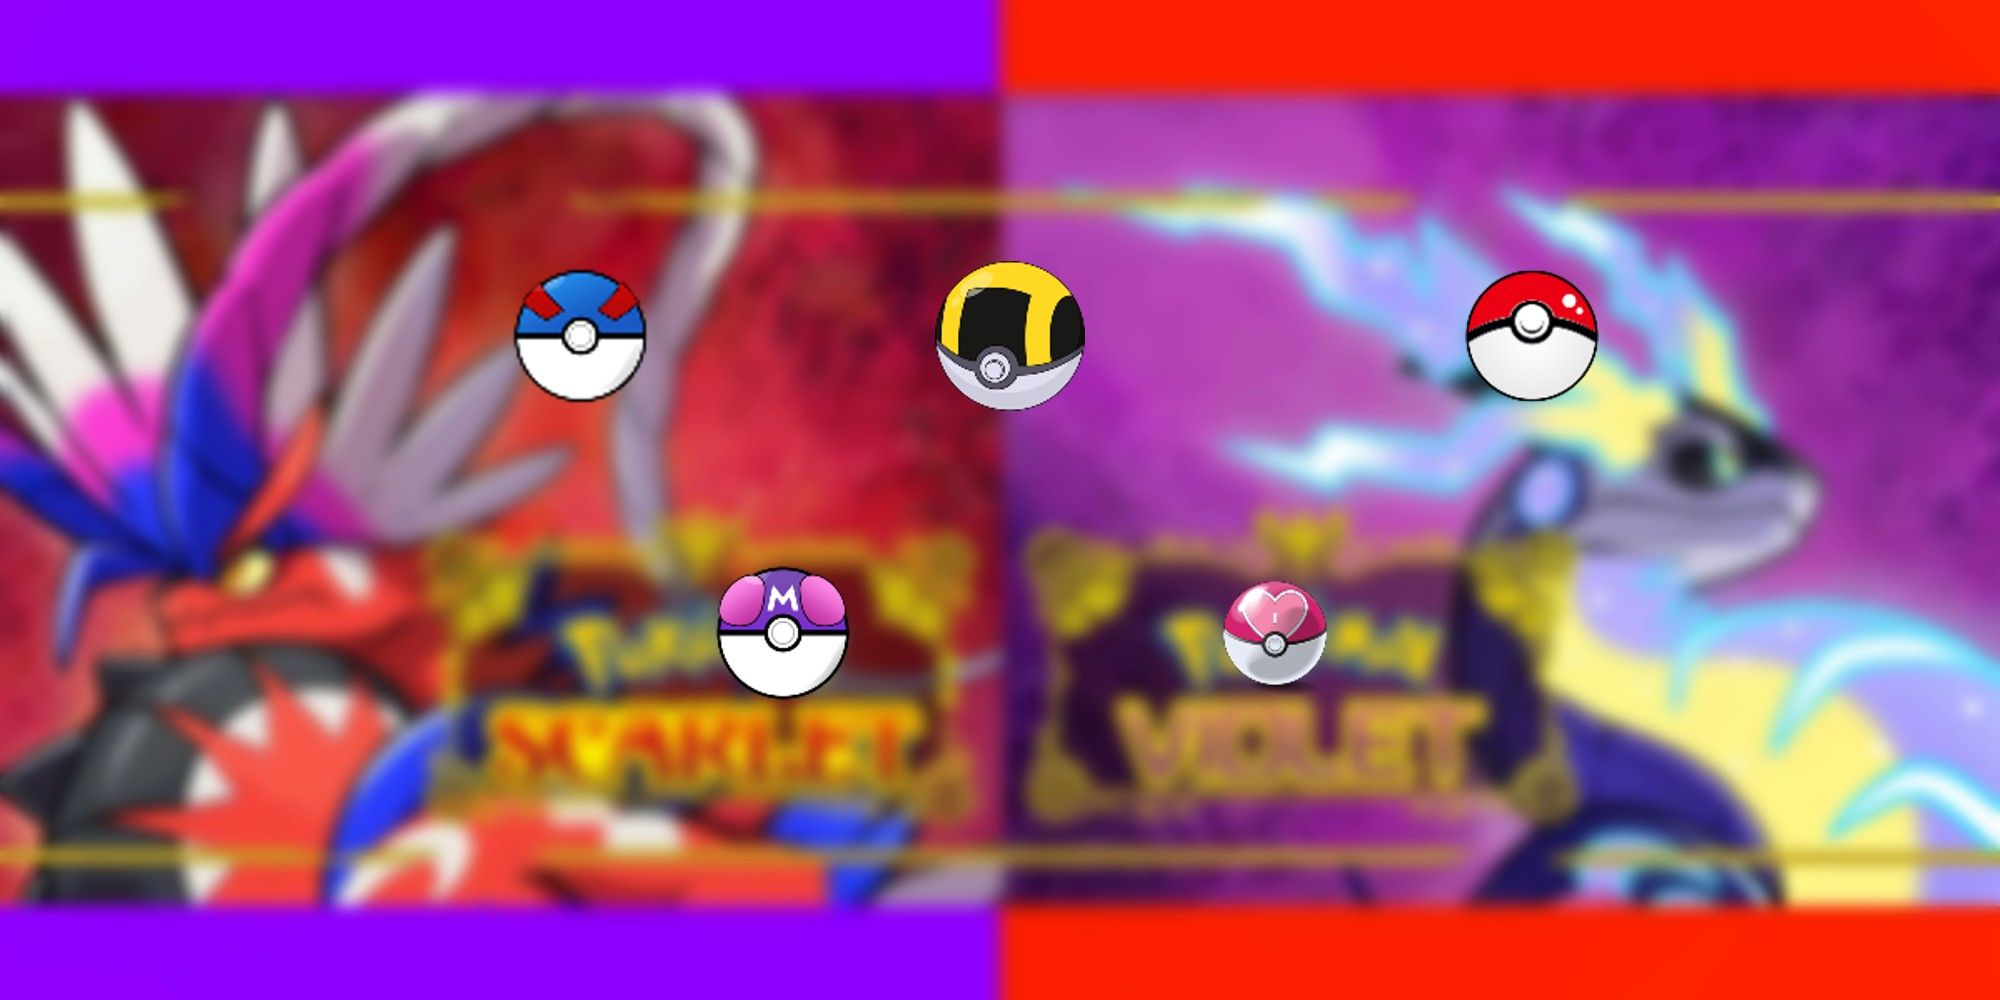 Pokemon Scarlet & Violet: All Poke Ball Types and Where to Find Them